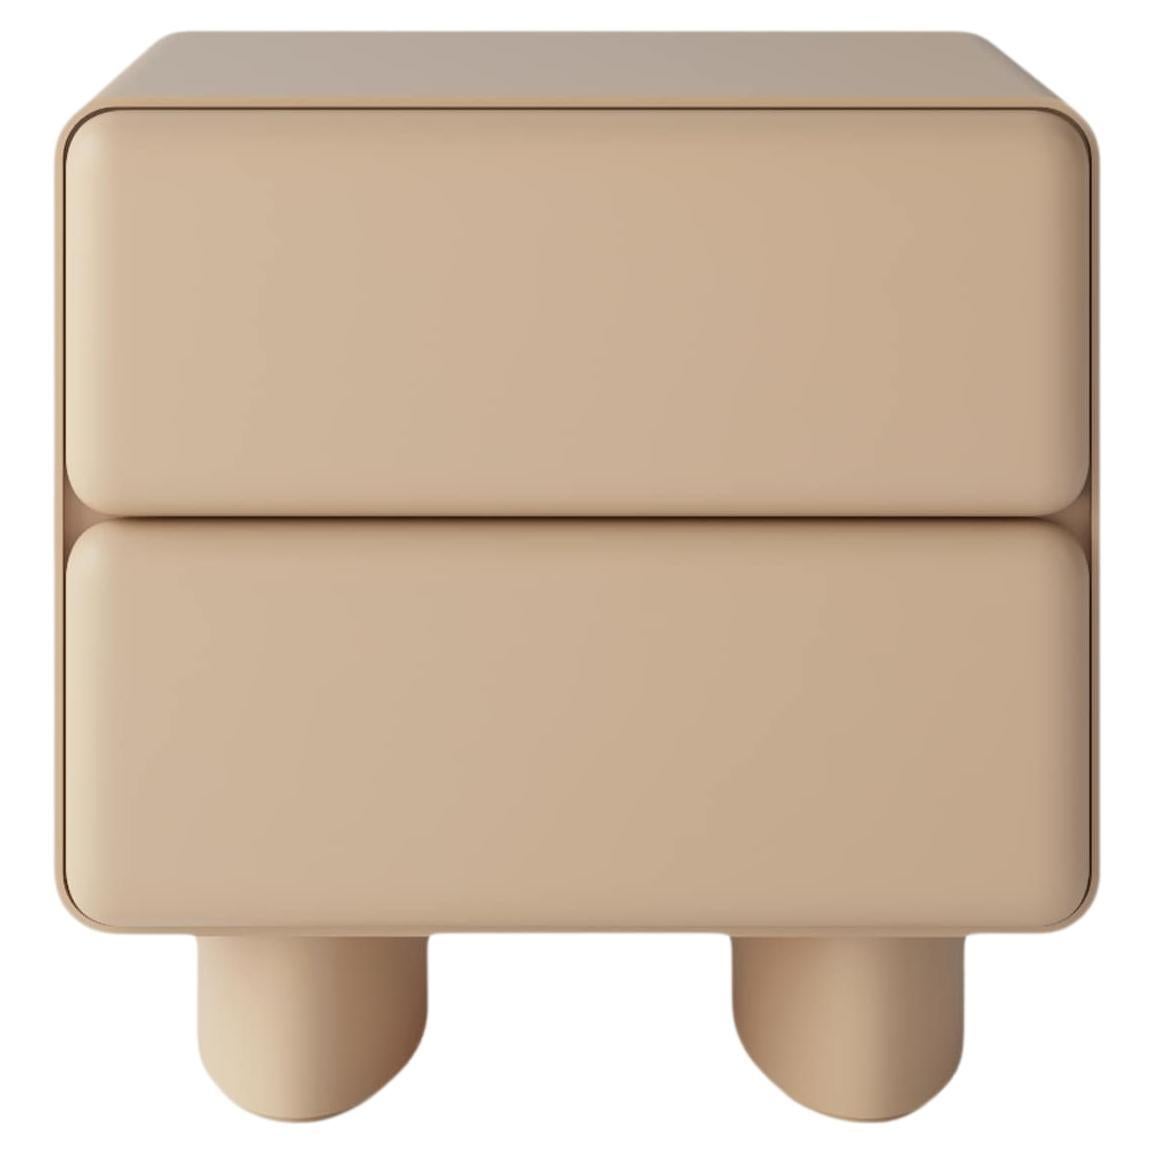 Tombul 2-Drawer Nightstand with Push-to-Open Mechanism, Butter Beige Colour For Sale